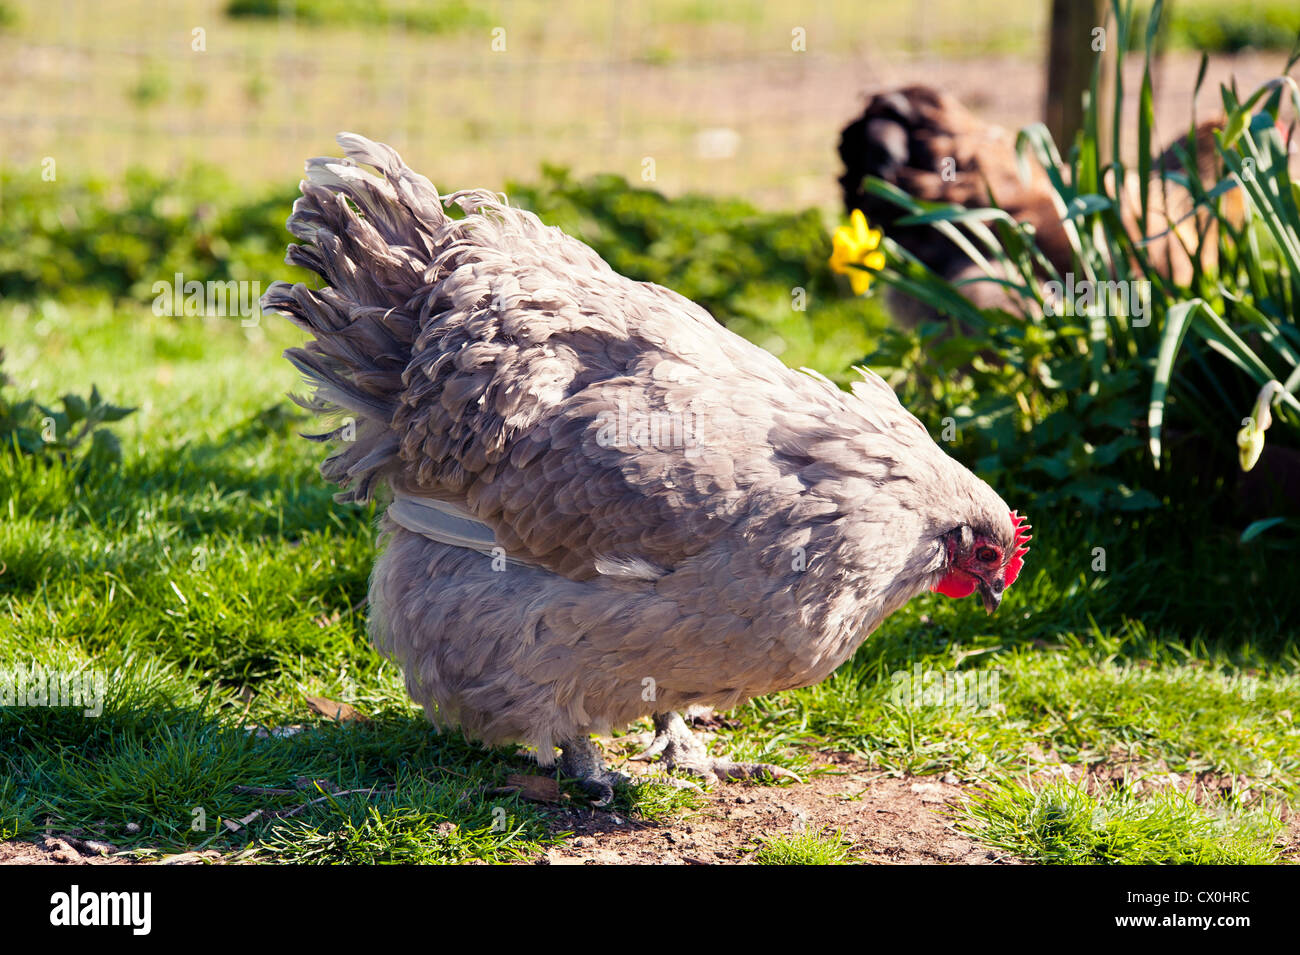 Lavender Orpington hen looking for food, background out of focus, Gold  Brahma Bantam hen in background out of focus Stock Photo - Alamy